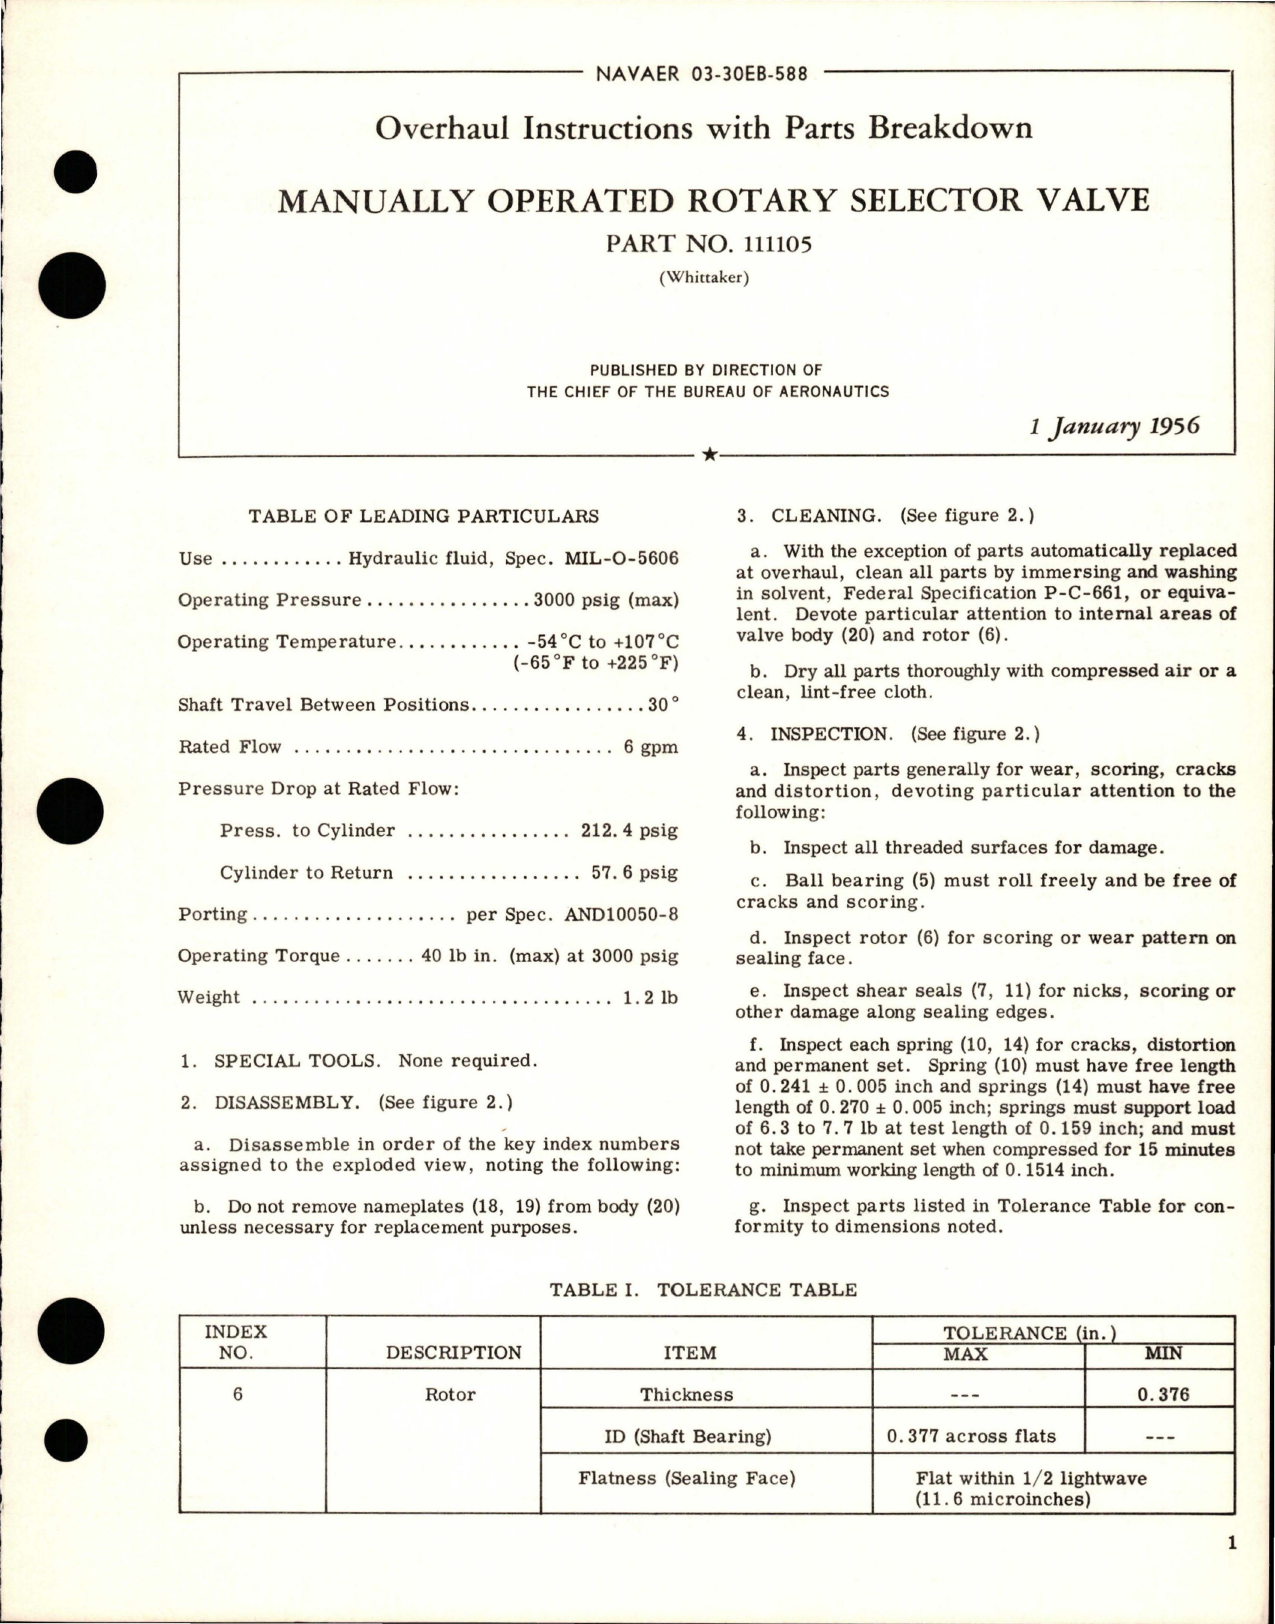 Sample page 1 from AirCorps Library document: Overhaul Instructions with Parts Breakdown for Manually Operated Rotary Selector Valve - Part 111105